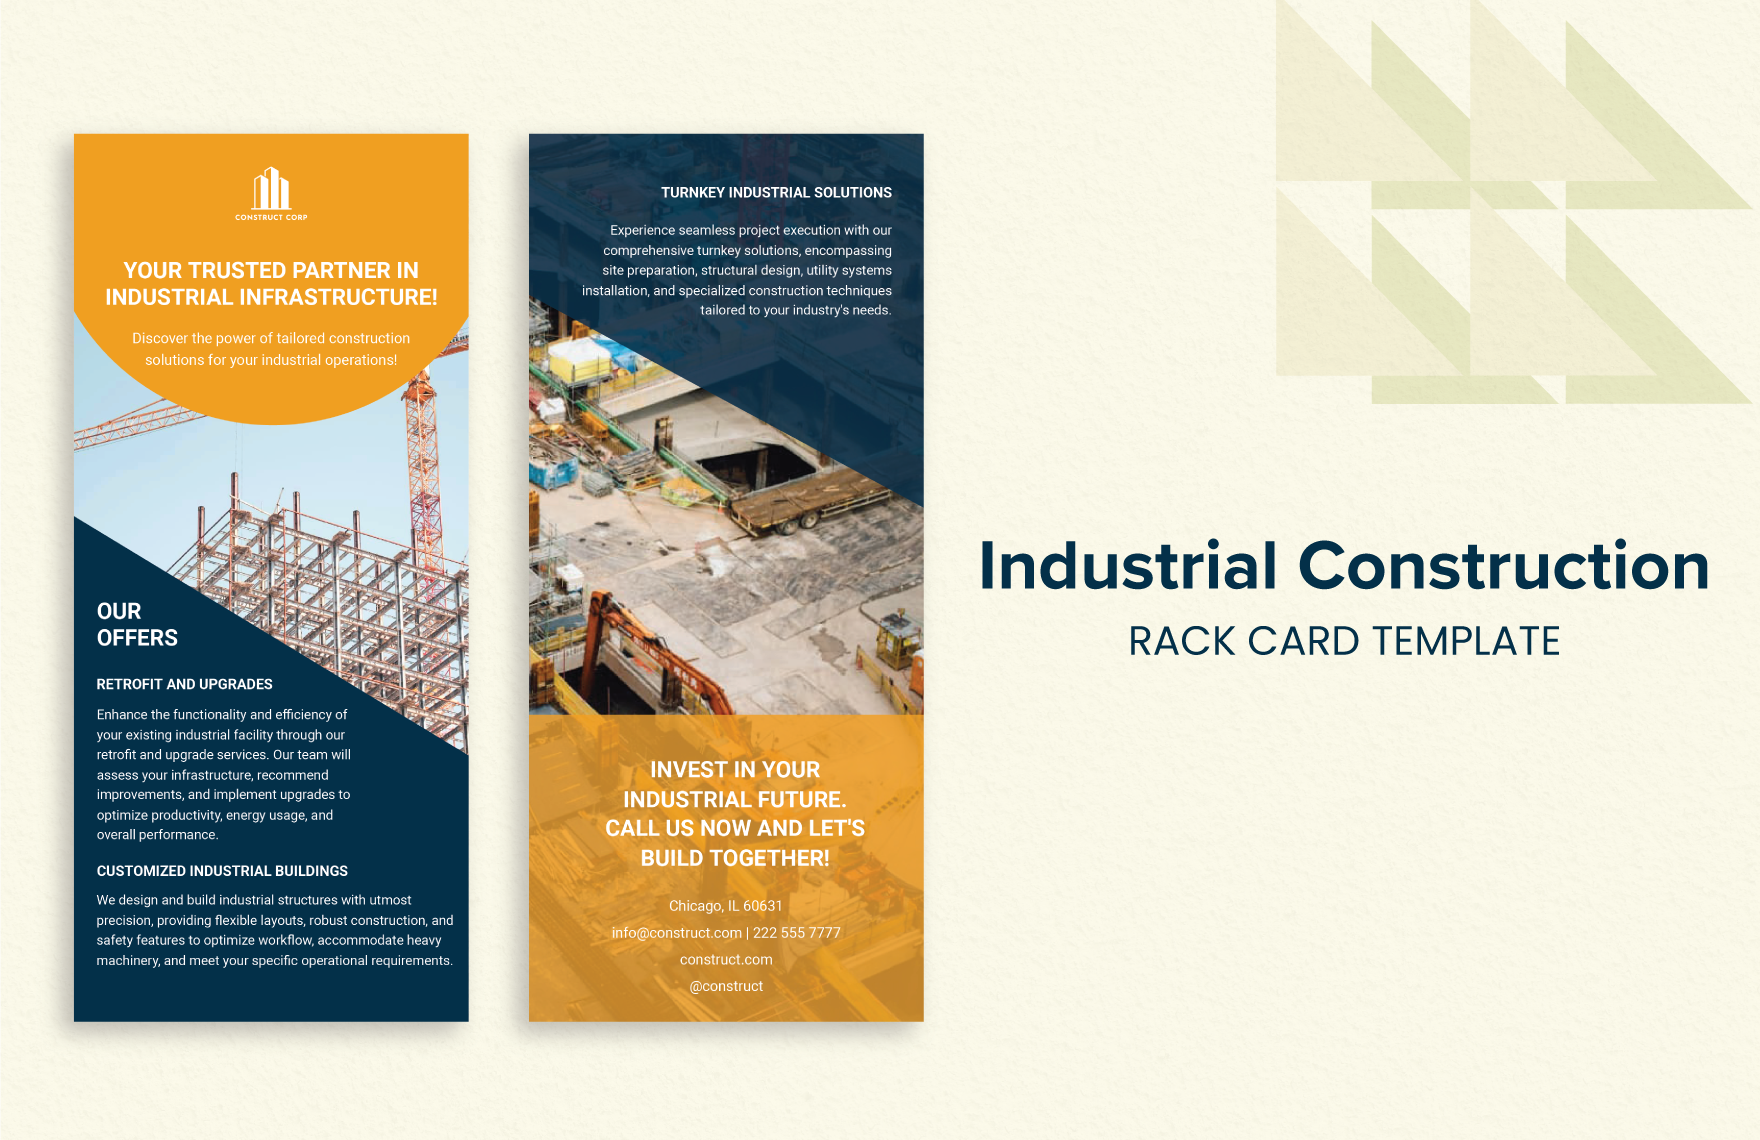 Industrial Construction Rack Card Template